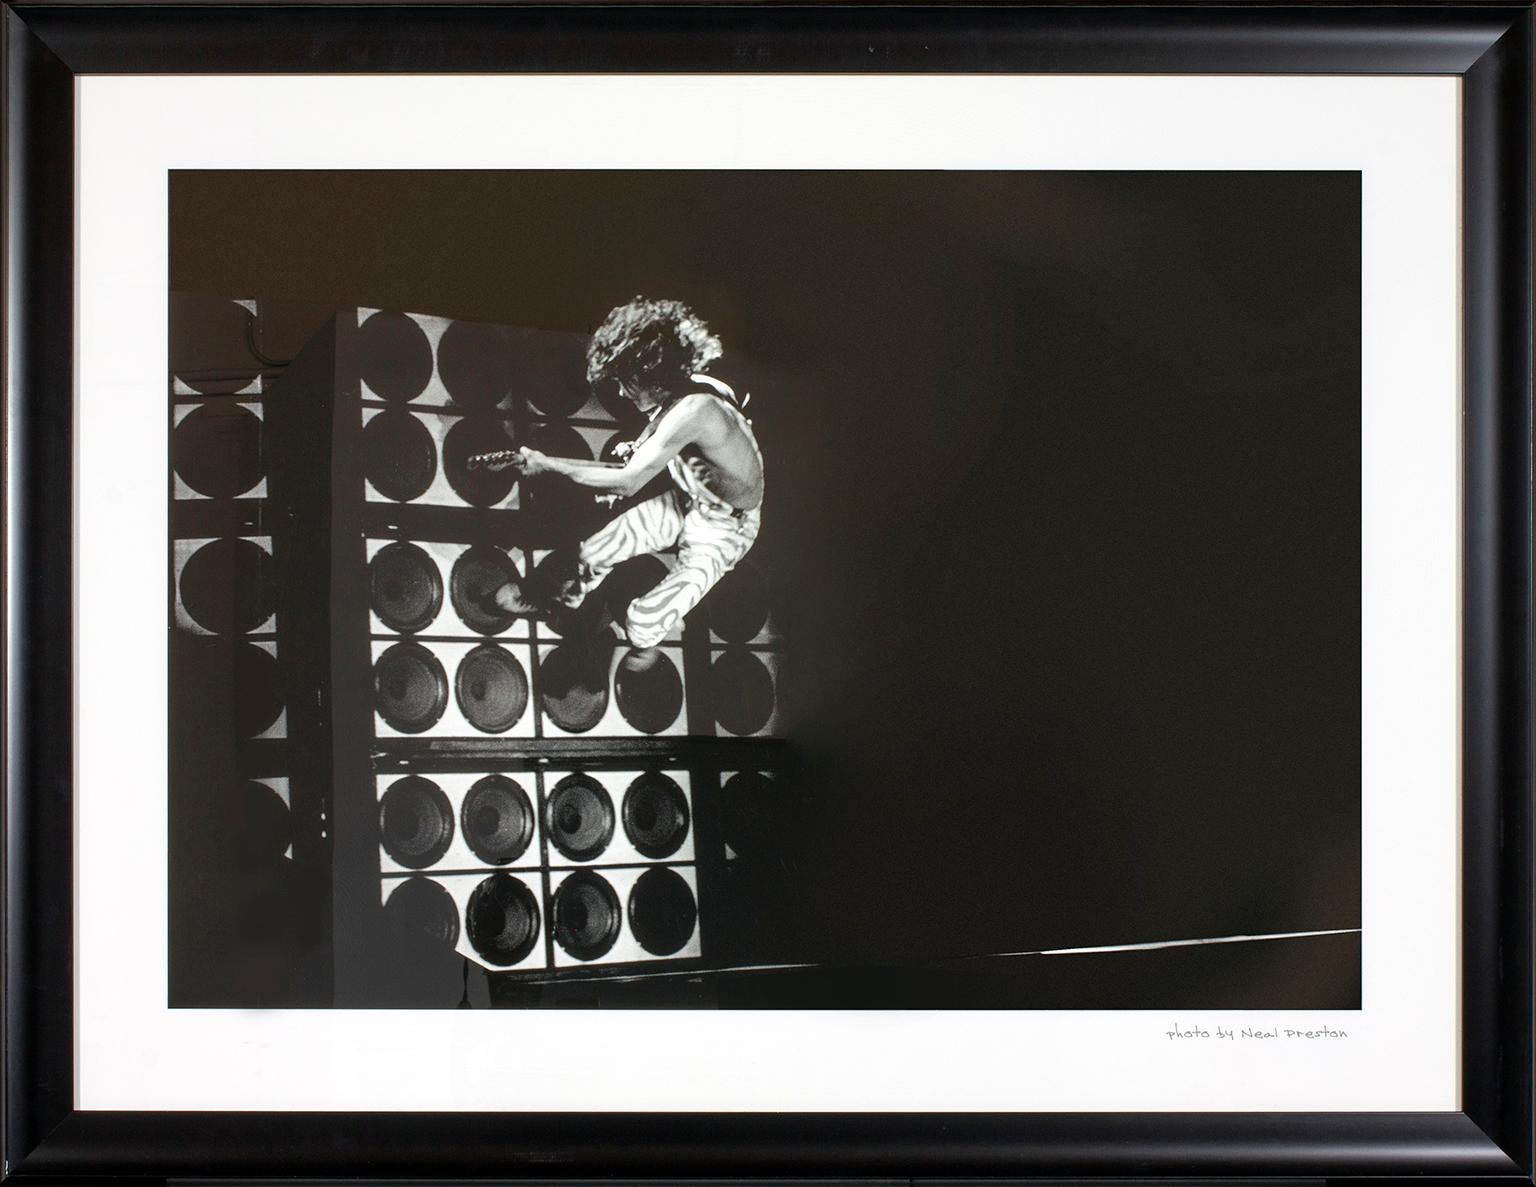 "Eddie Van Halen Wall Jump" photograph by Neal Preston. Photo by Neal Preston hand written on front lower right corner. This framed photograph was previously displayed in a guest rooms of the original Hard Rock Hotel & Casino in Las Vegas, Nevada,